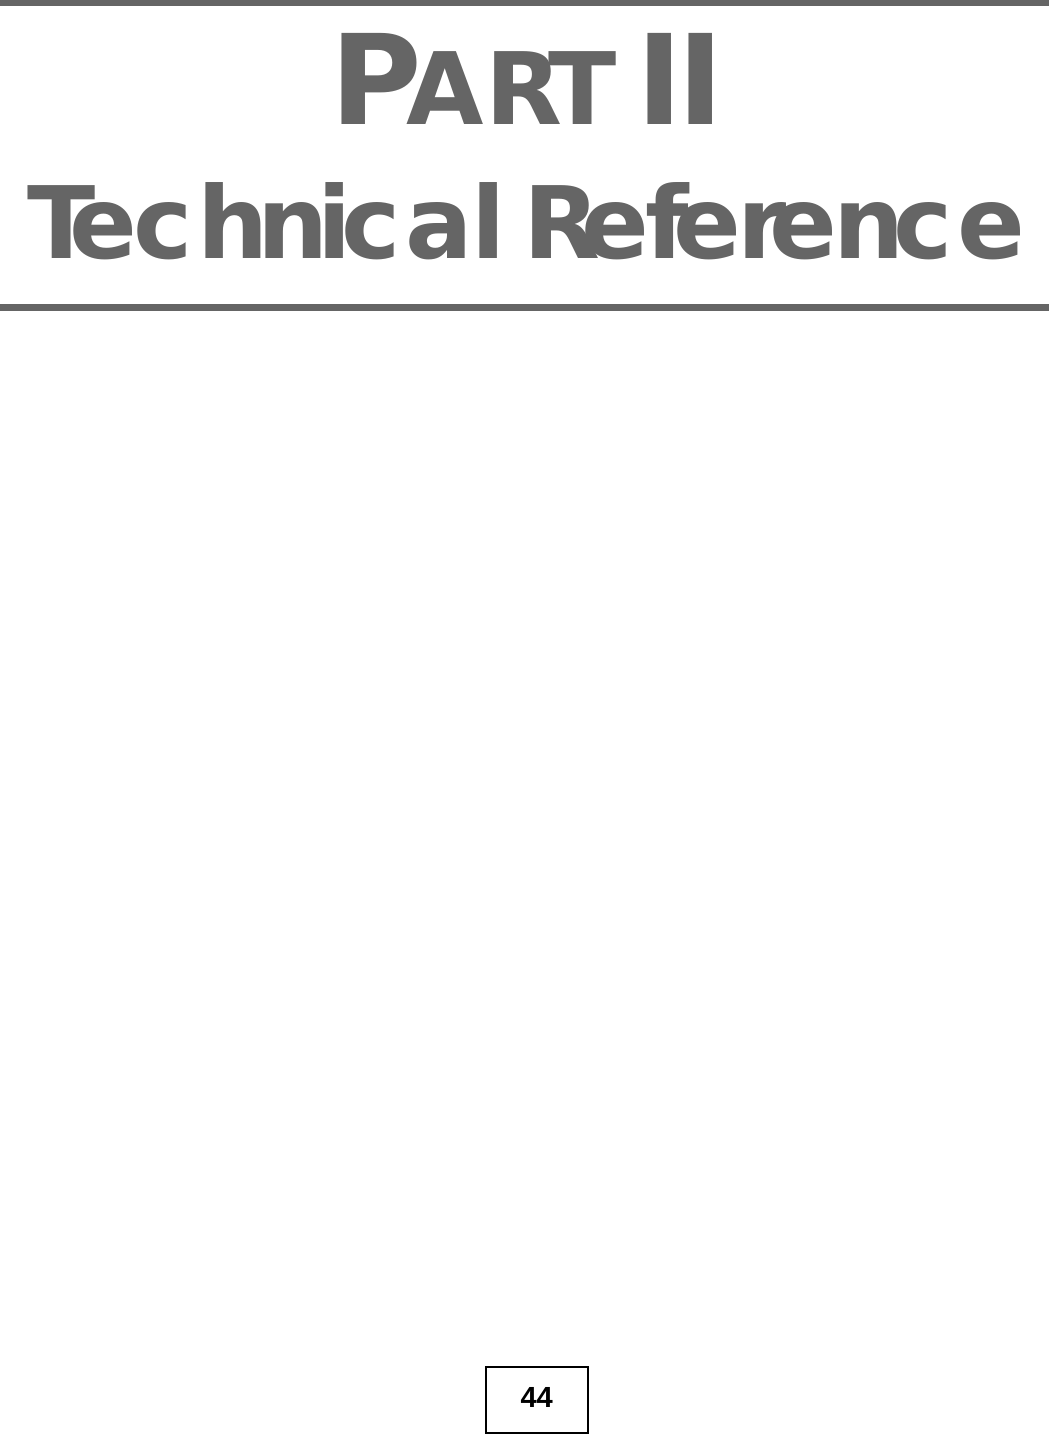 44PART IITechnical Reference